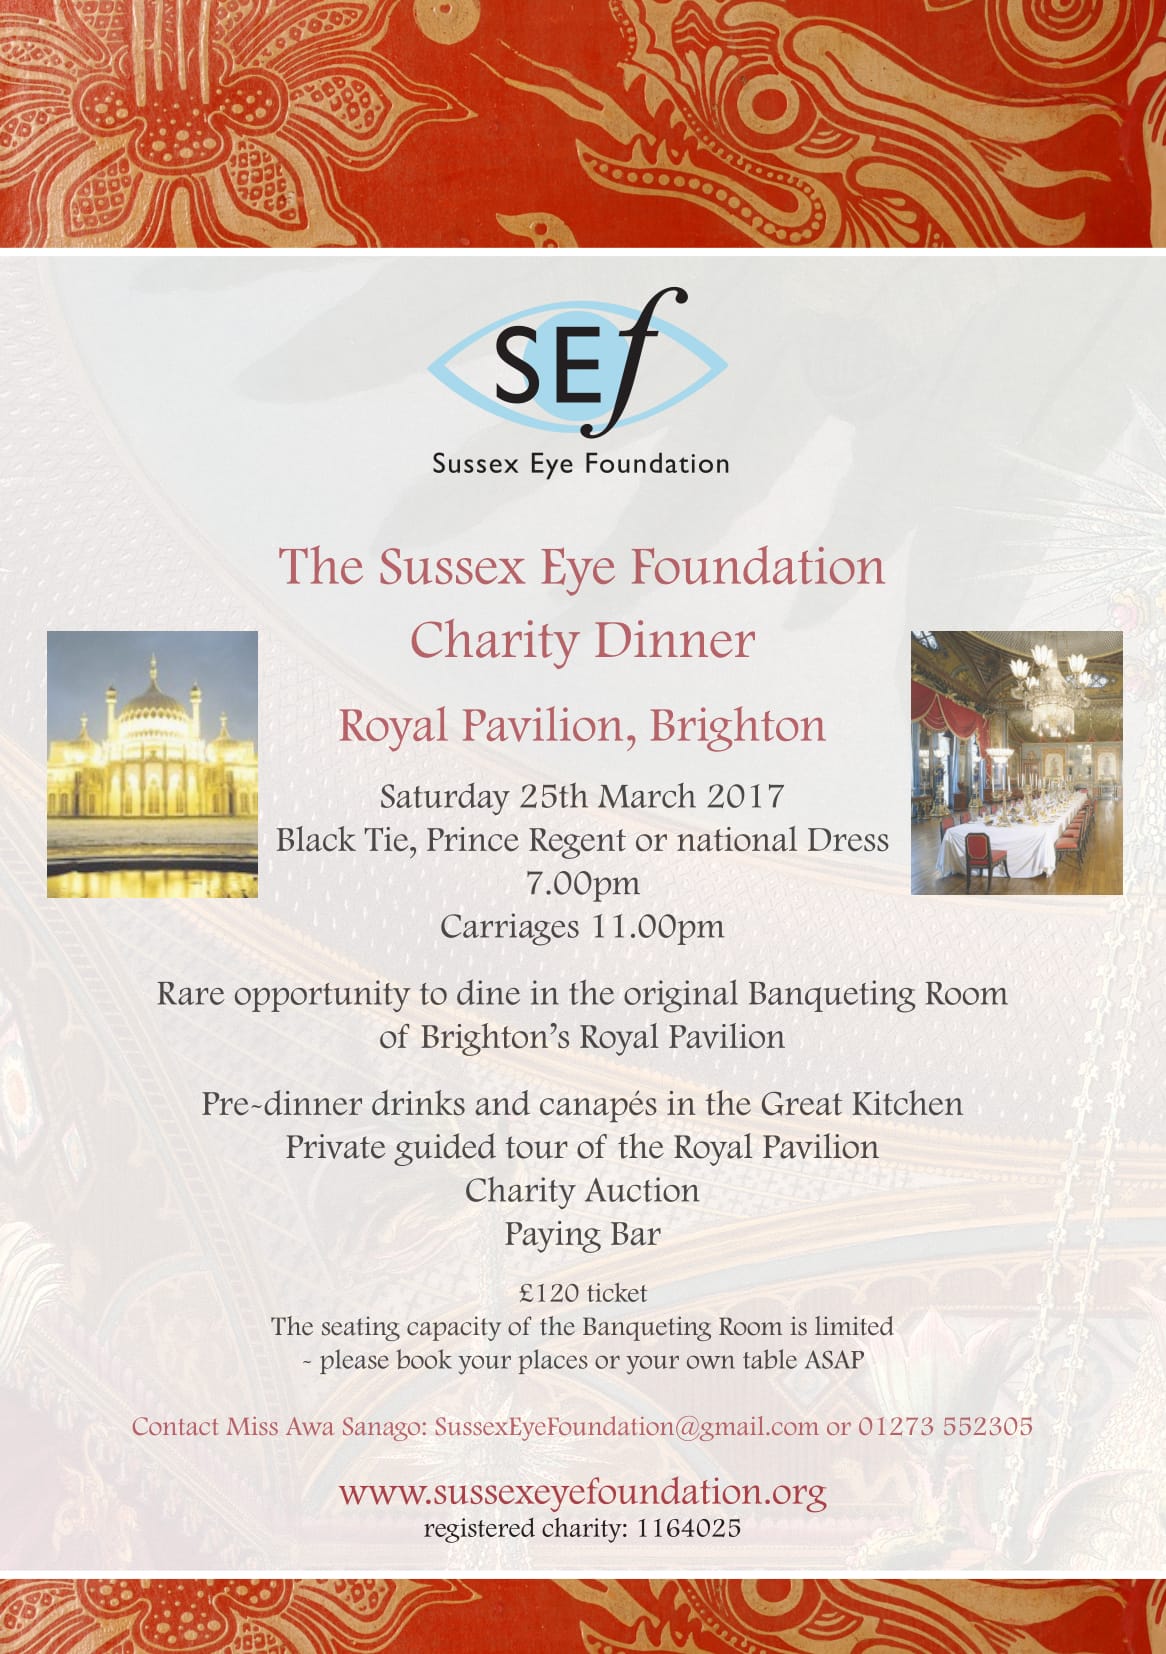 Charity Dinner on 25th March 2017 at the Royal Pavillion Brighton 7pm